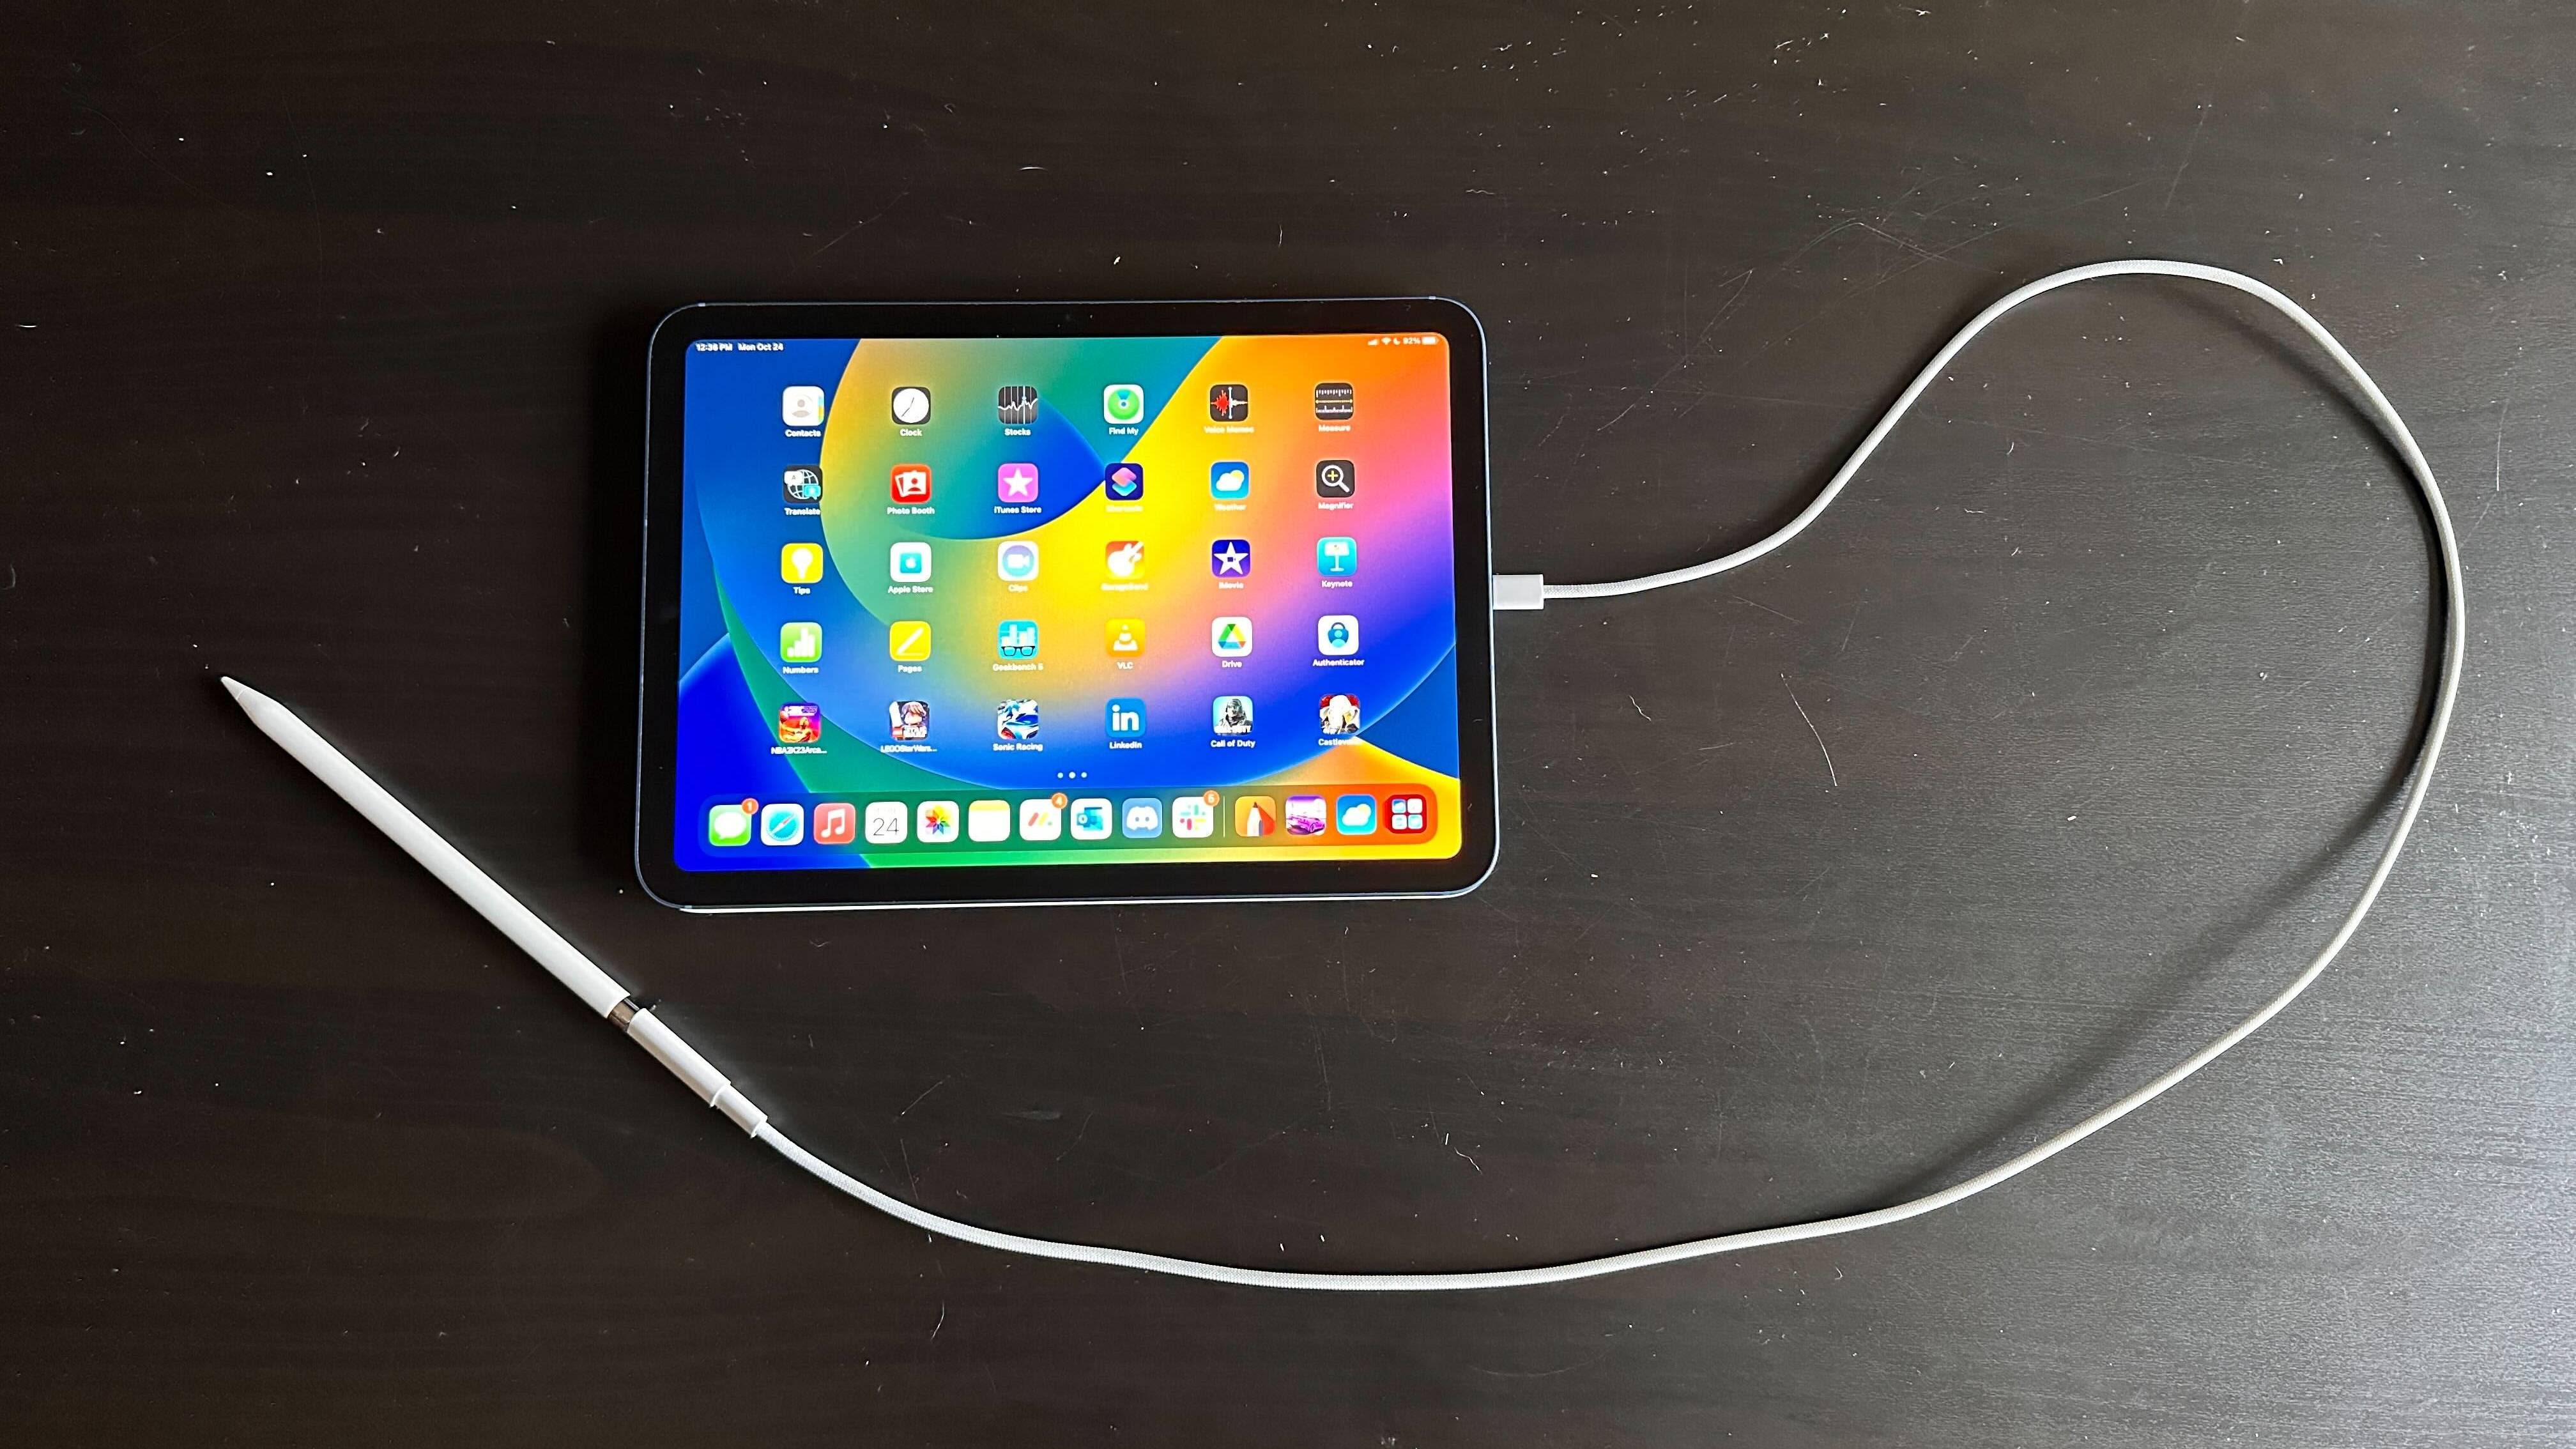 iPad (2022, 10th gen) review: A great tablet that most people can